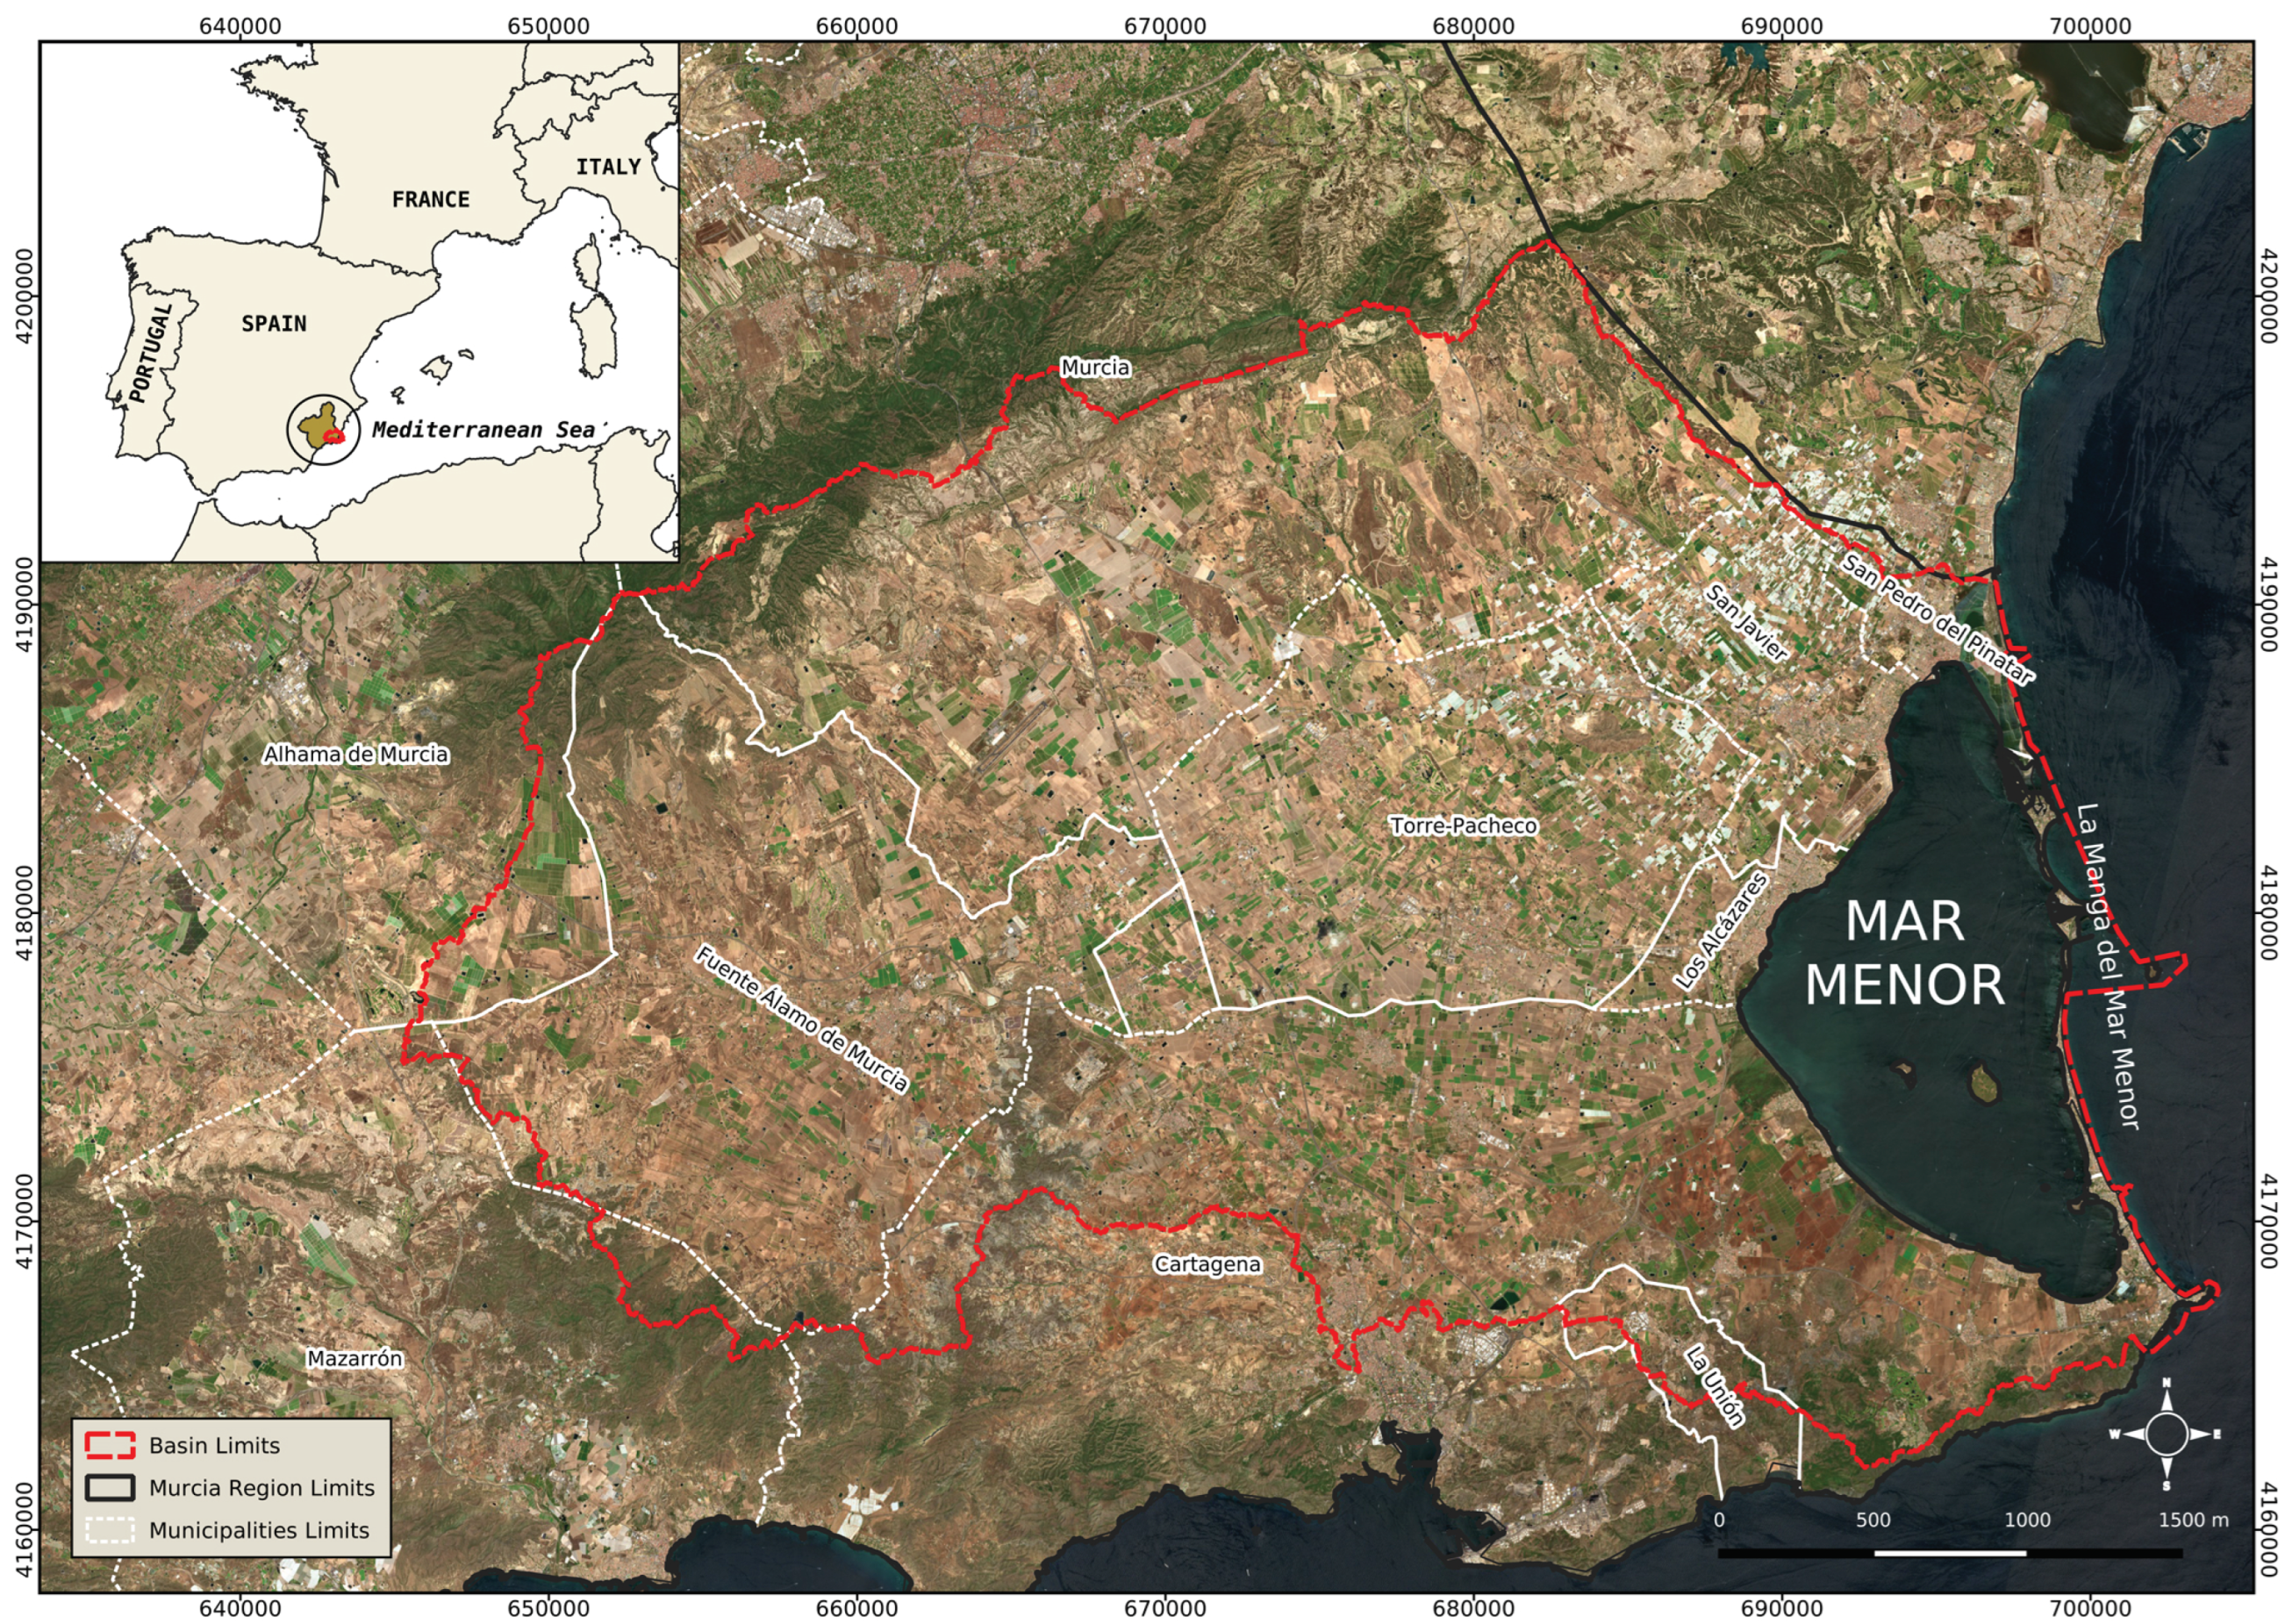 Remote Sensing | Free Full-Text | Effect of the Synergetic Use of  Sentinel-1, Sentinel-2, LiDAR and Derived Data in Land Cover Classification  of a Semiarid Mediterranean Area Using Machine Learning Algorithms